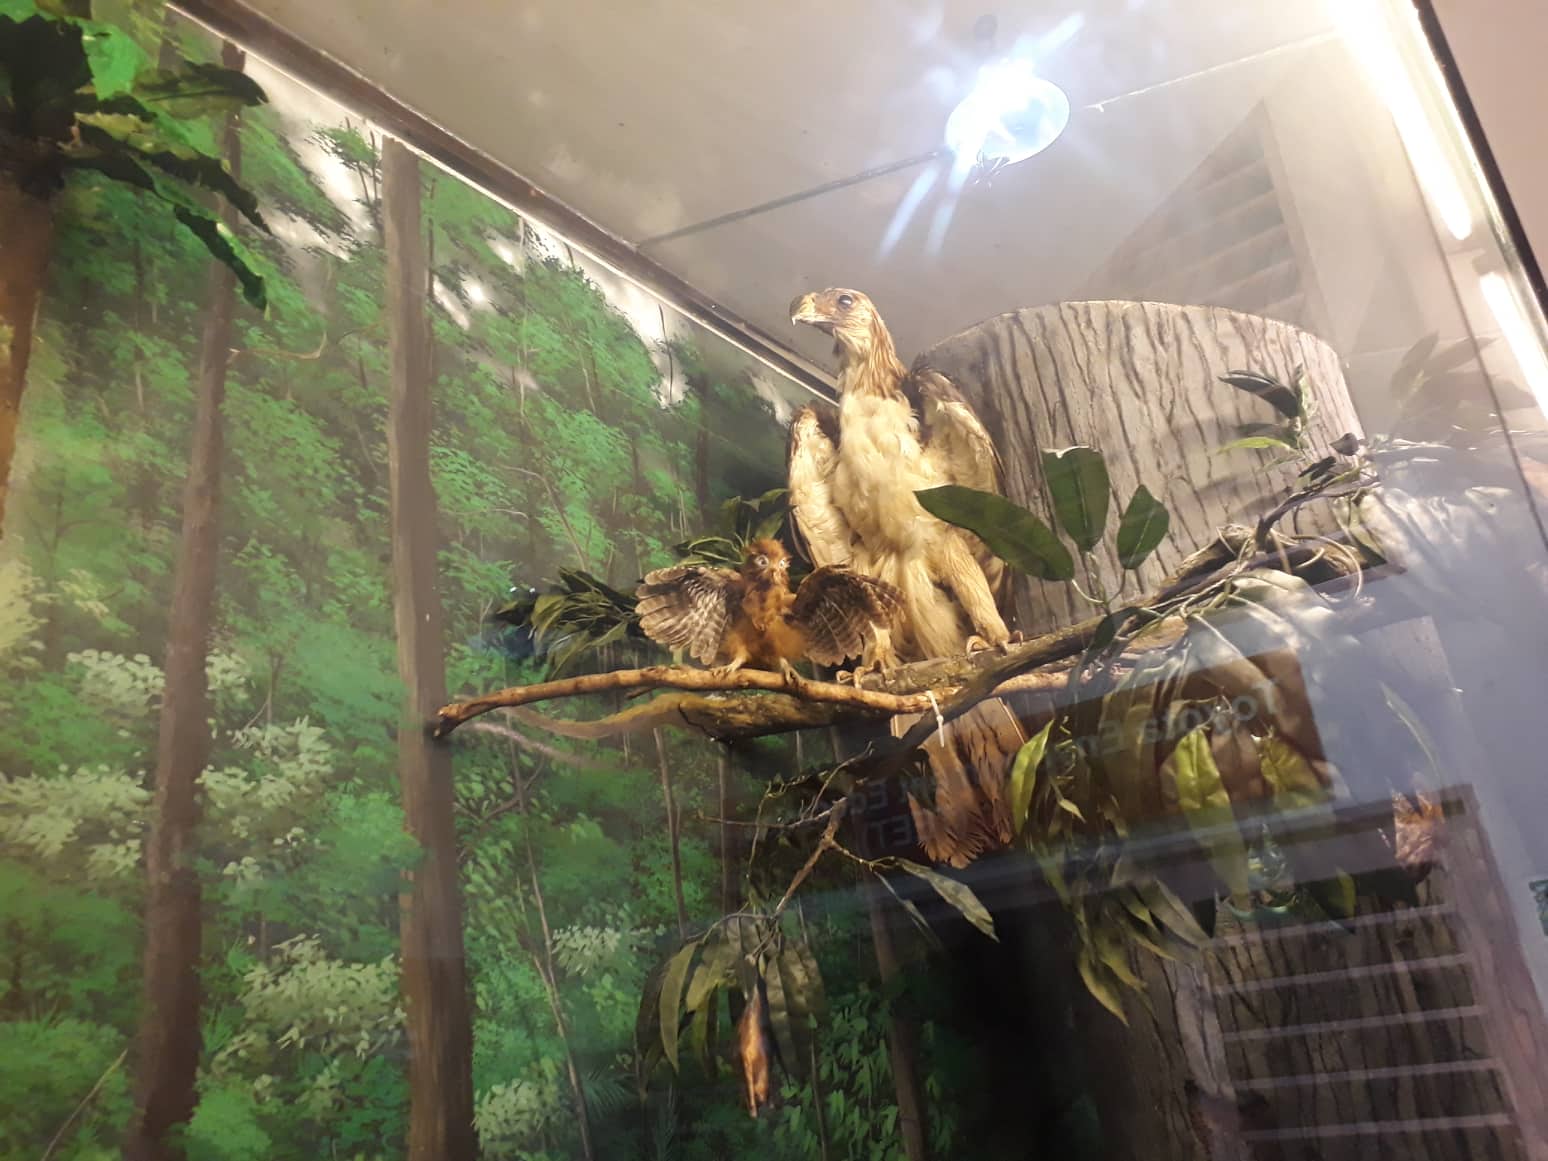 MBG Welcomed the Newest Member of its Rainforest Biodiversity Diorama - An  ASEAN Heritage Park